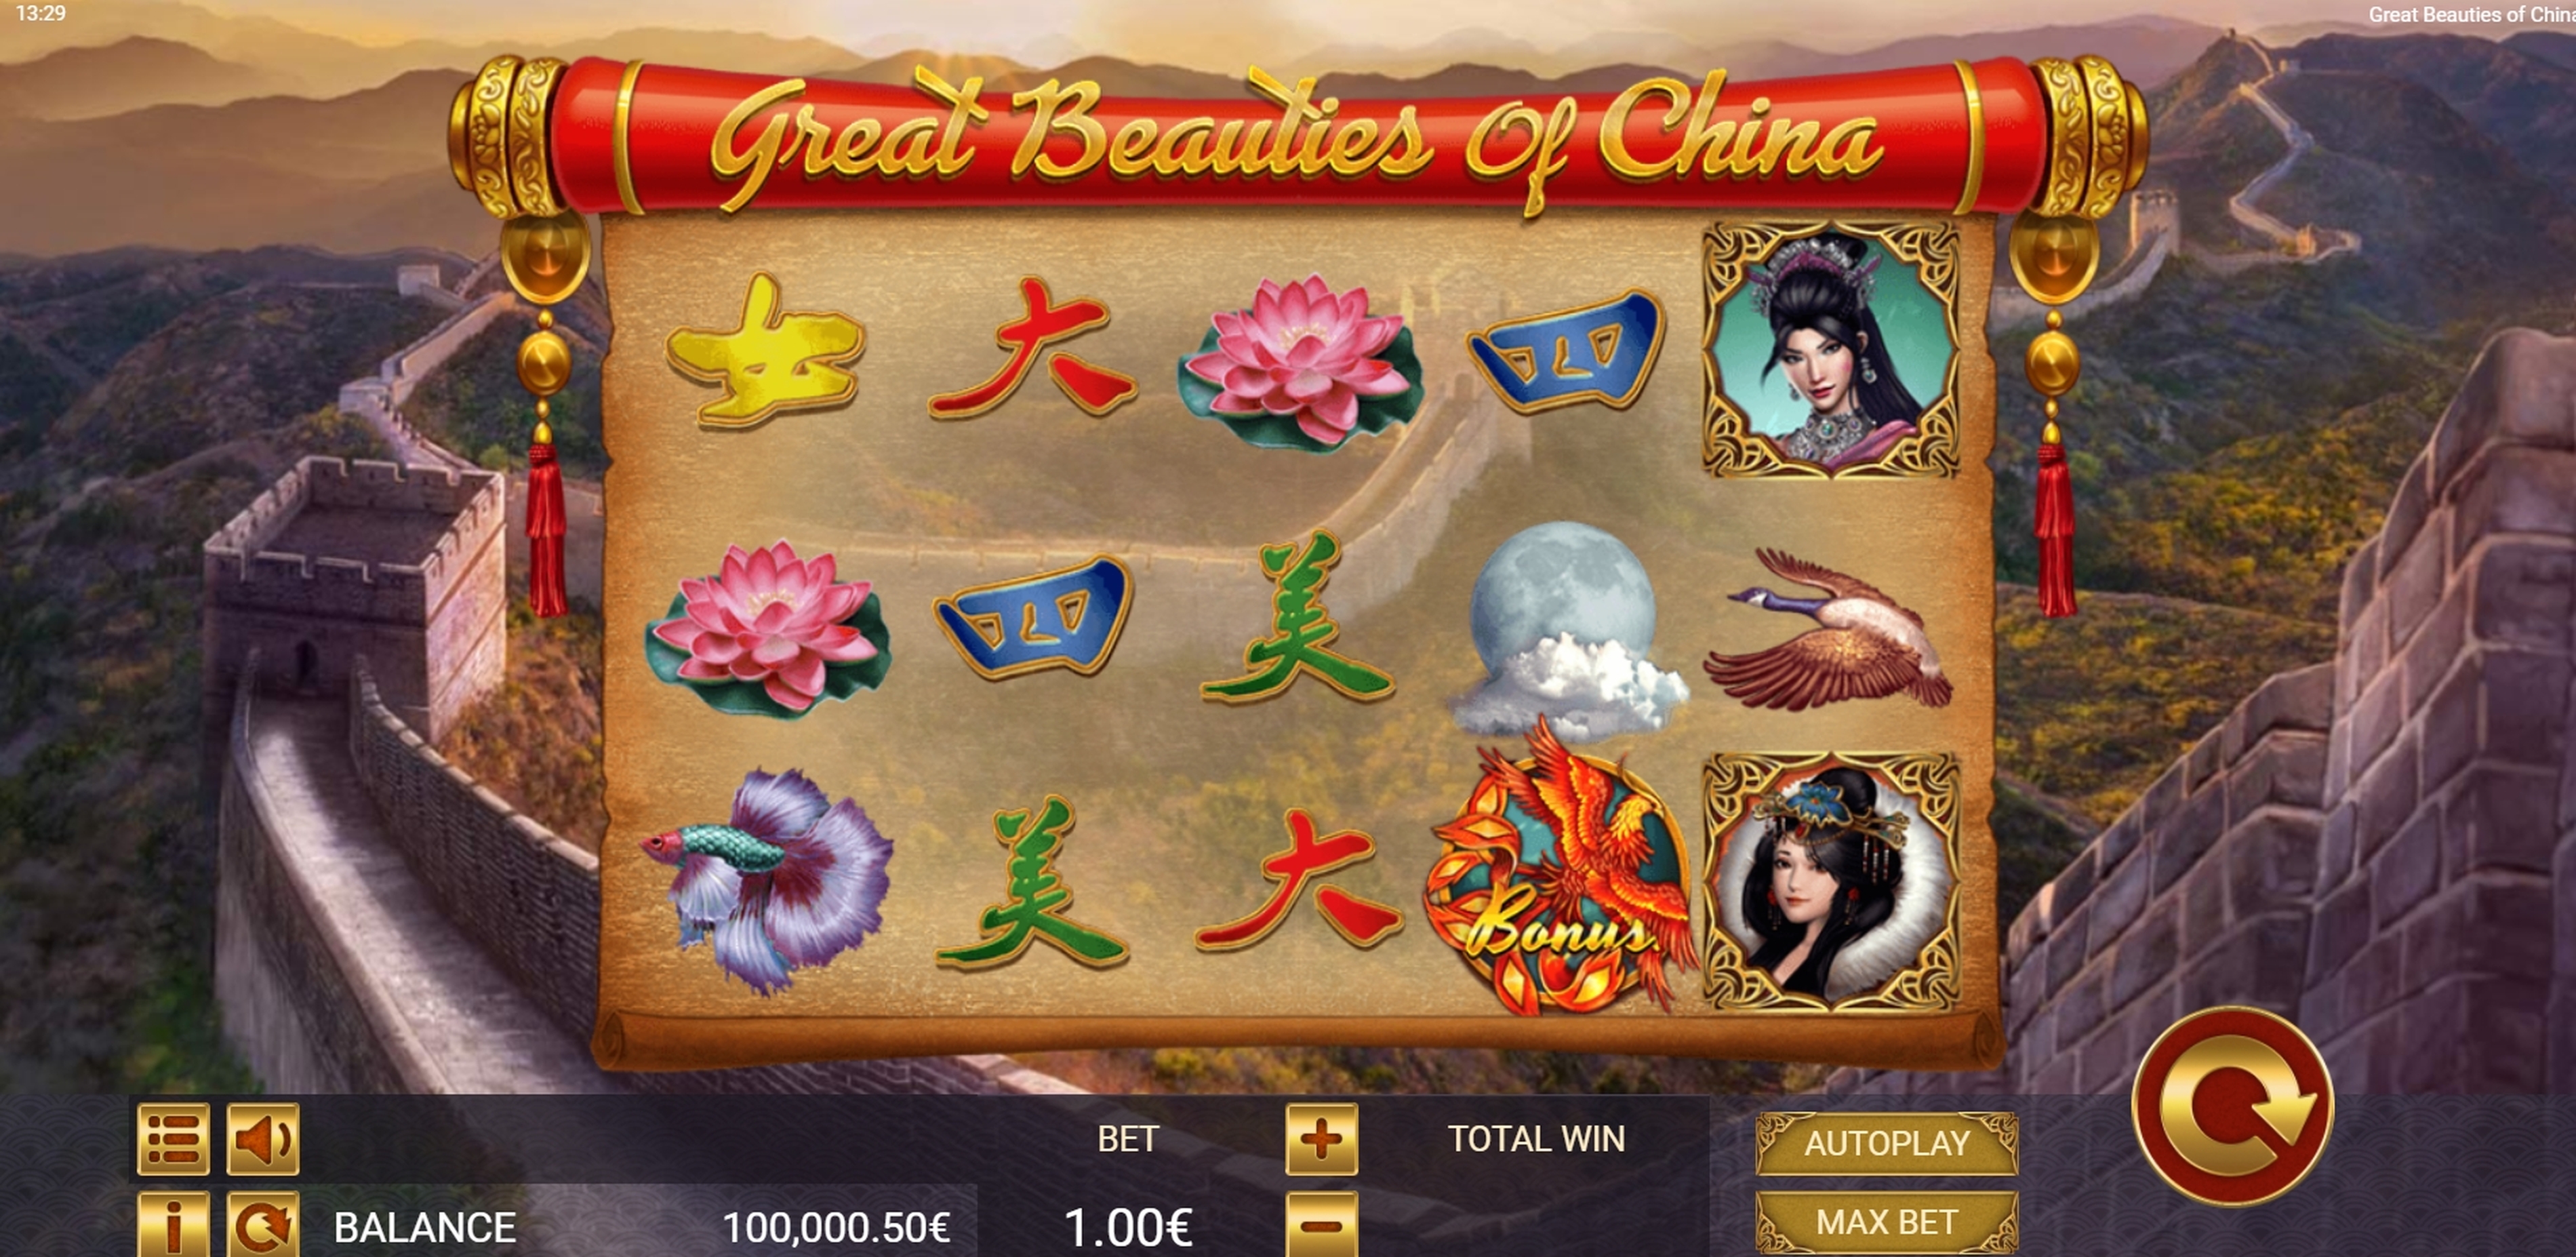 Great Beautiies Of China demo